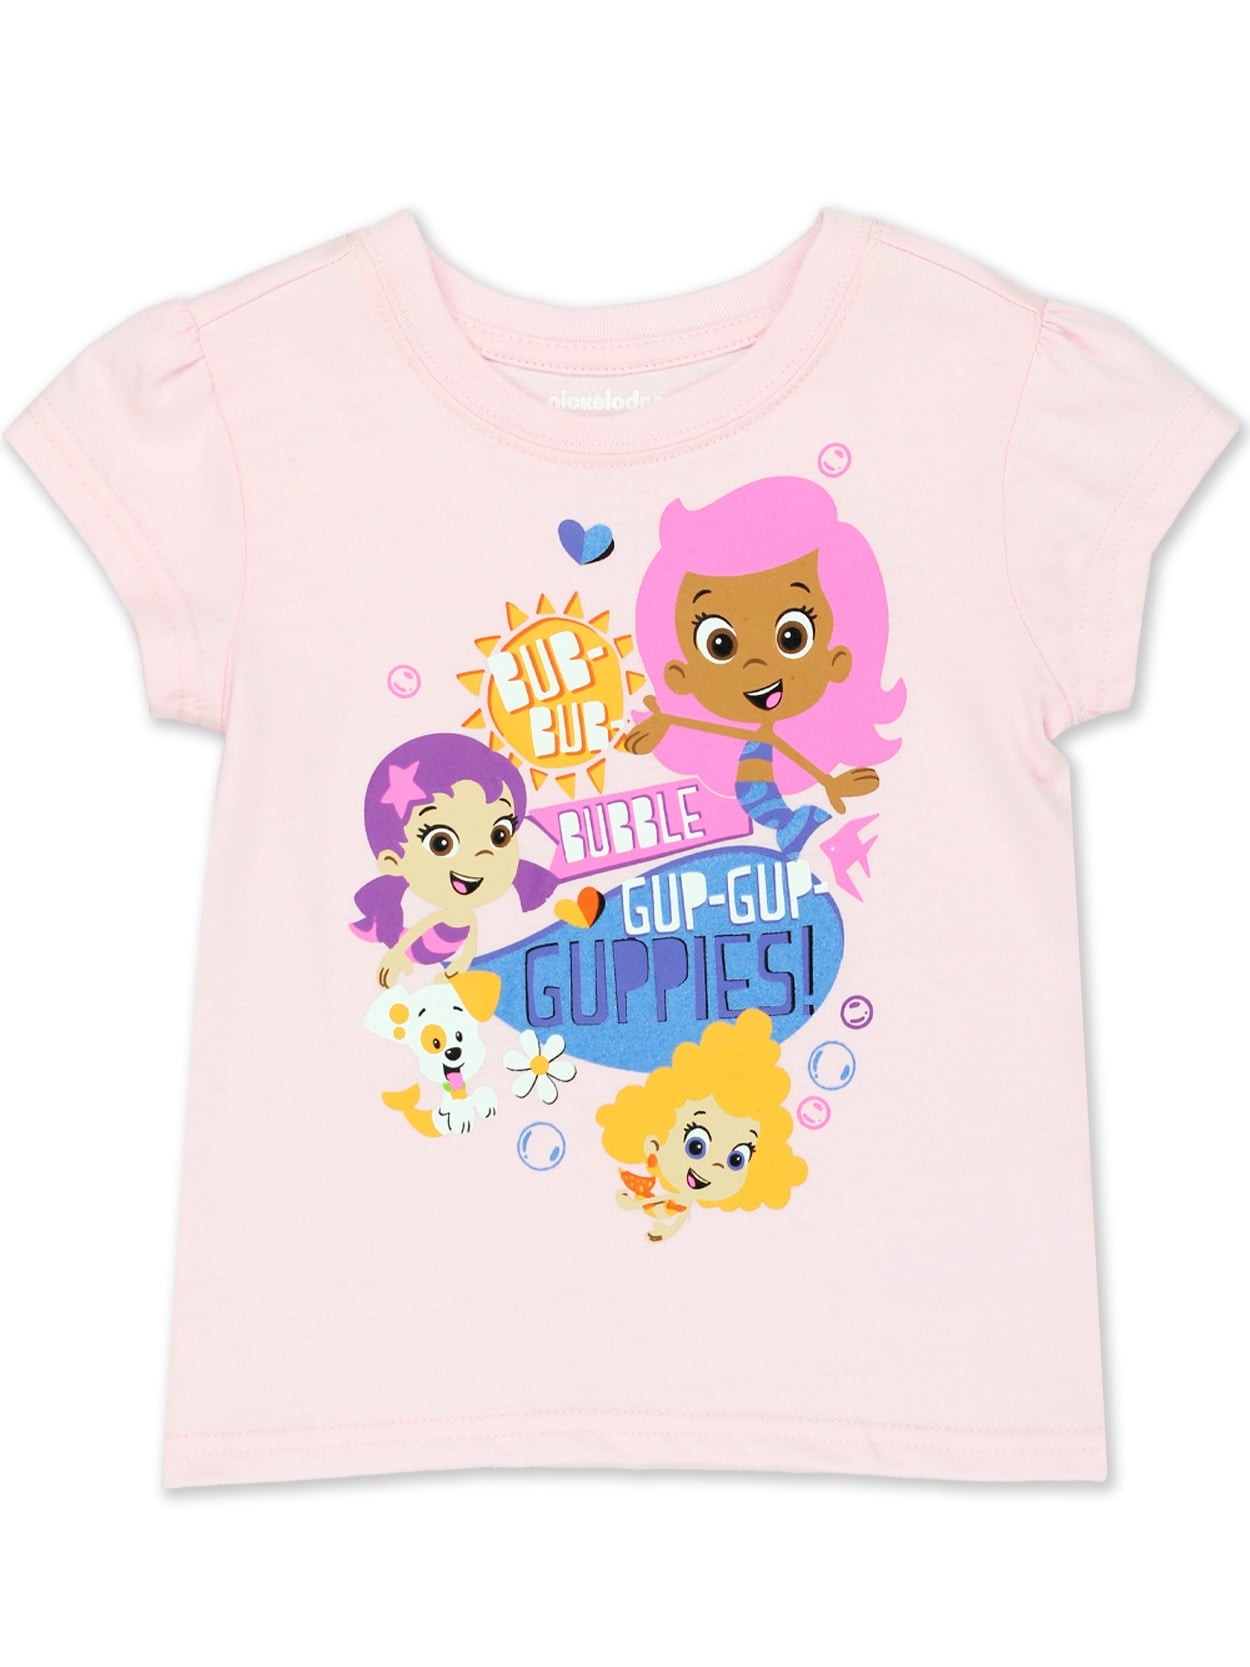 Bubble Guppies Toddler Girl Shirt & Shorts Outfit Set New 4T Molly Bubble Puppy 